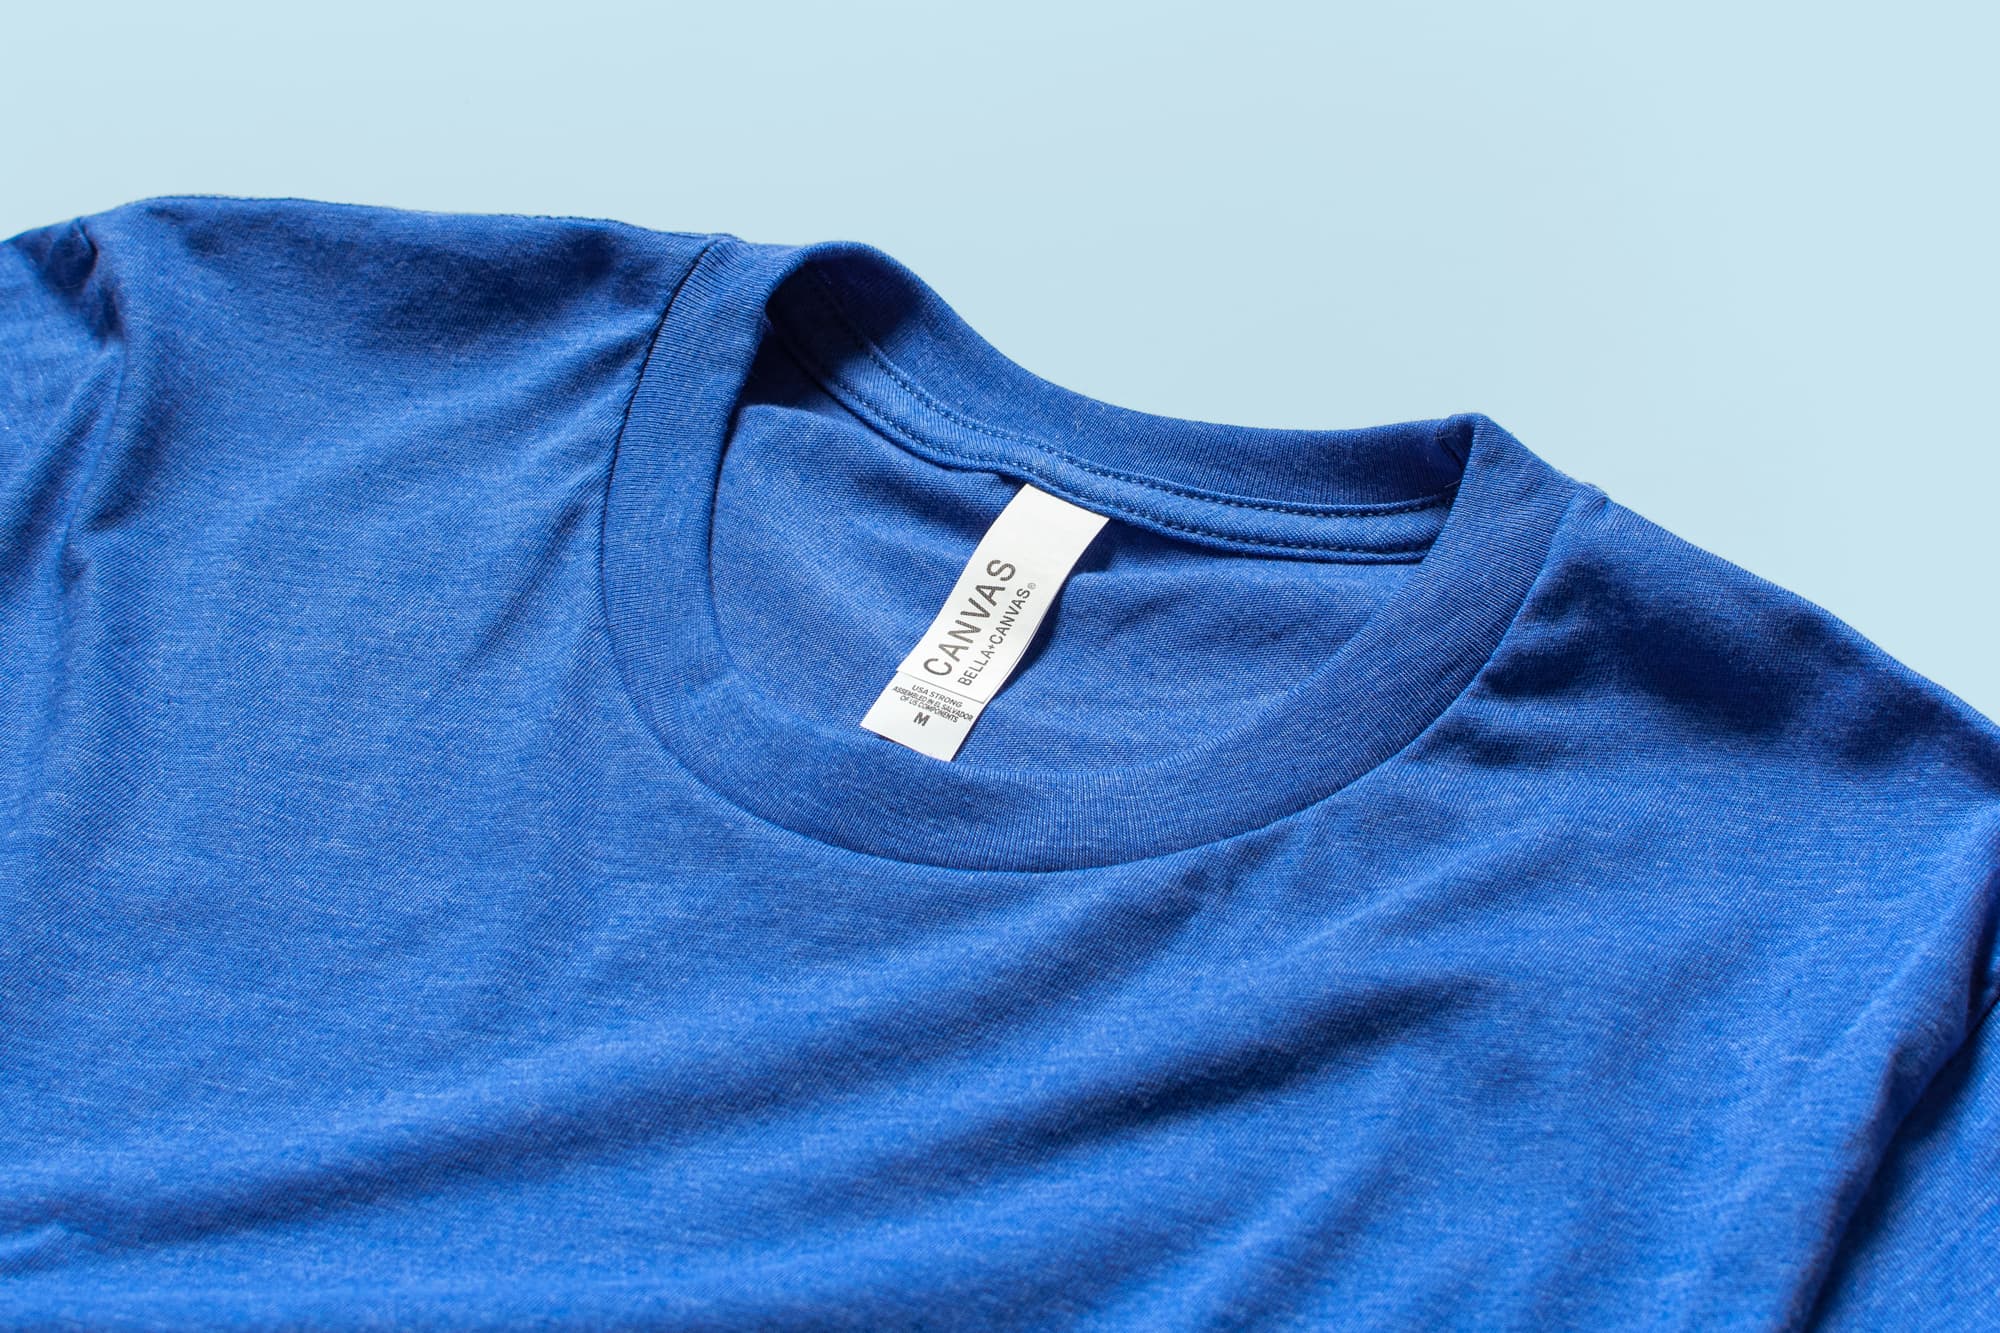 Detail of the collar and tag of the Bella Canvas Jersey T-Shirt.